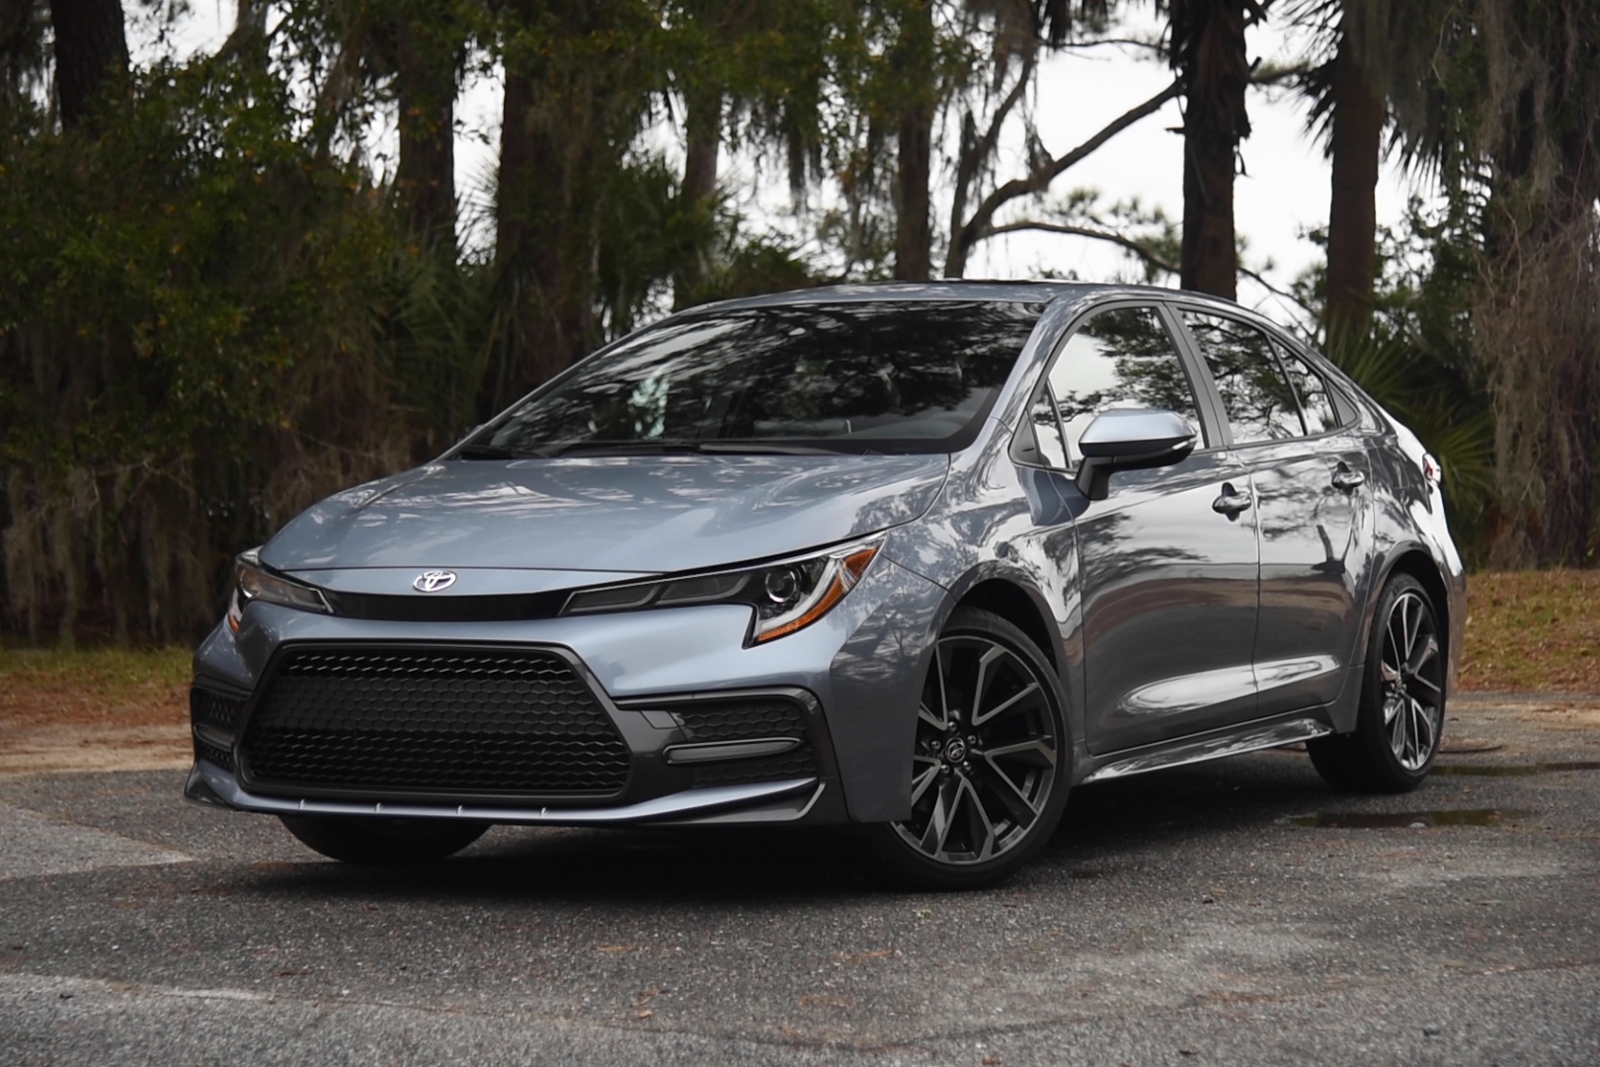 2020 Toyota Corolla XSE Review, Specs, Price - Carshighlight.com